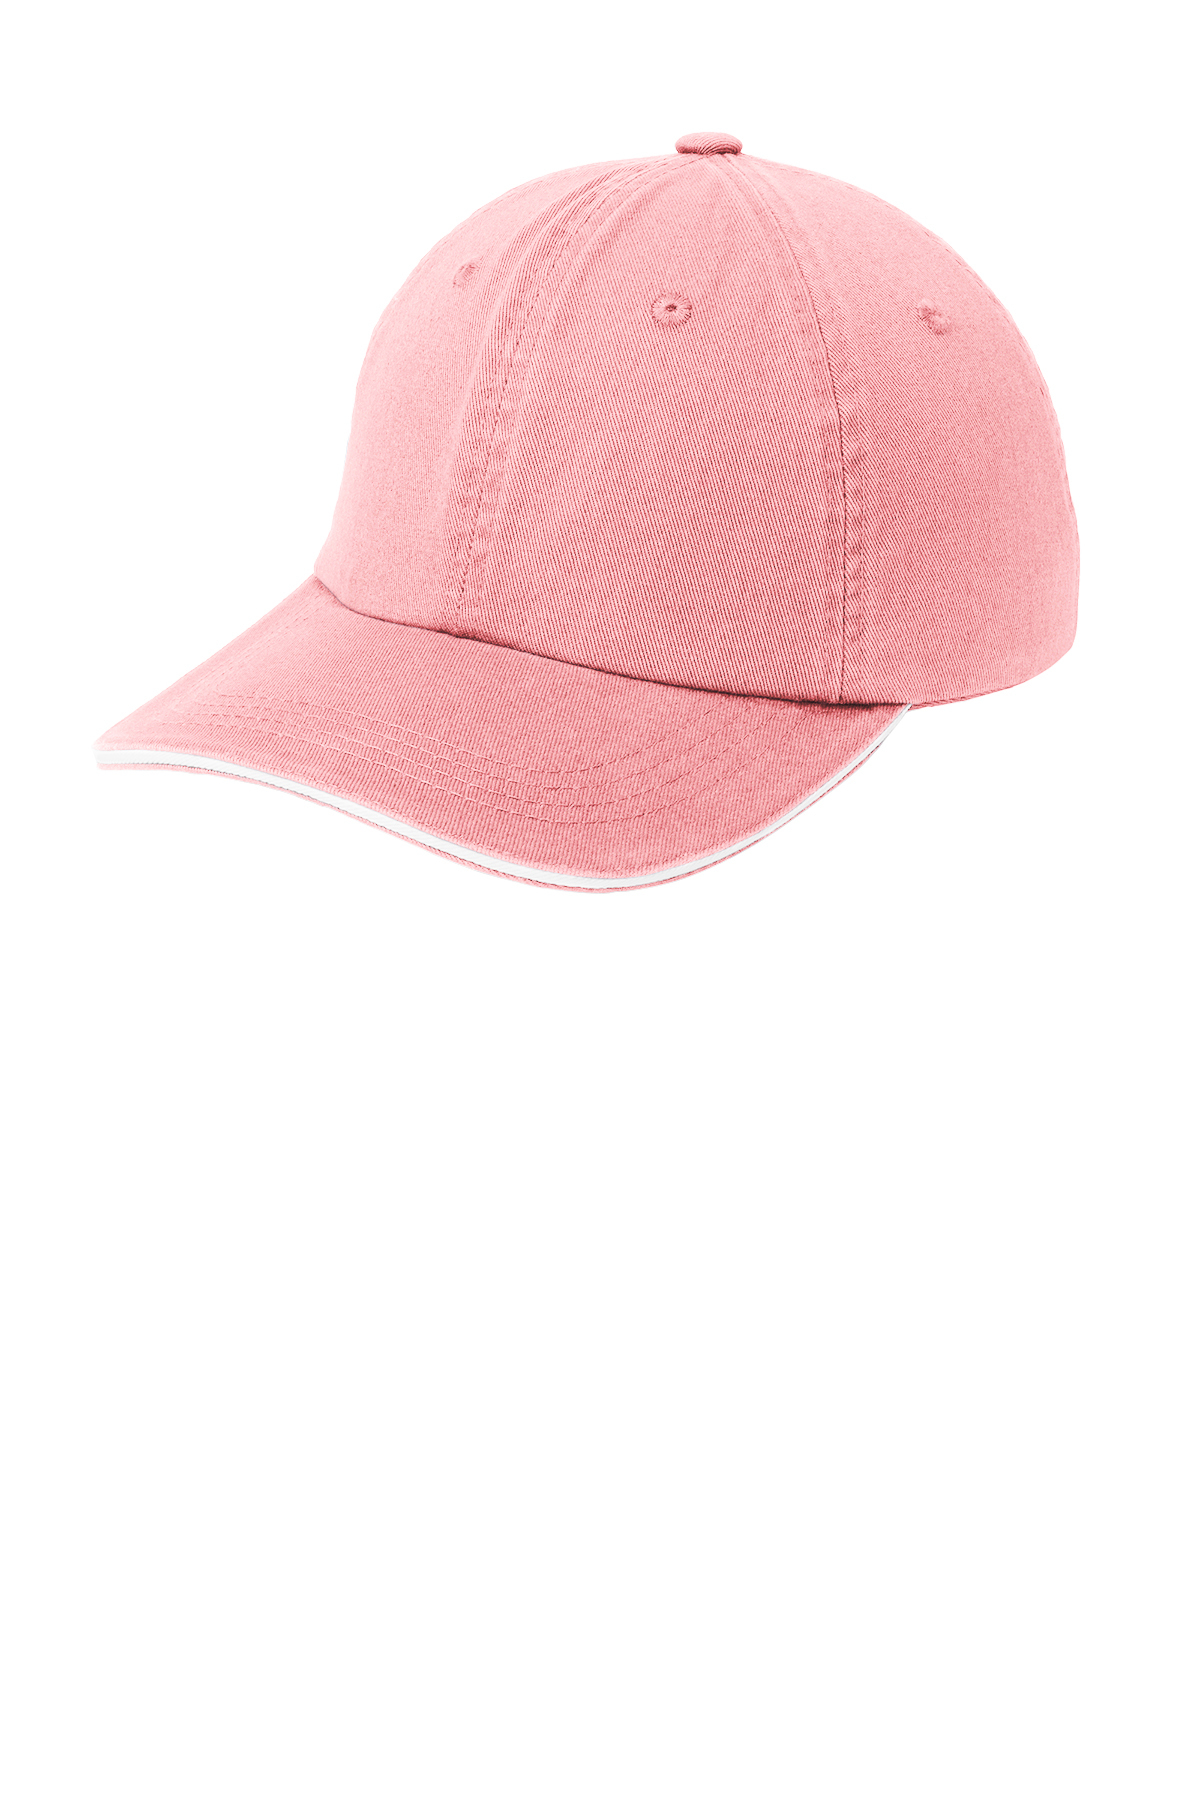 Port Authority C830 Sandwich Bill Cap with Striped Closure - Light Pink/White